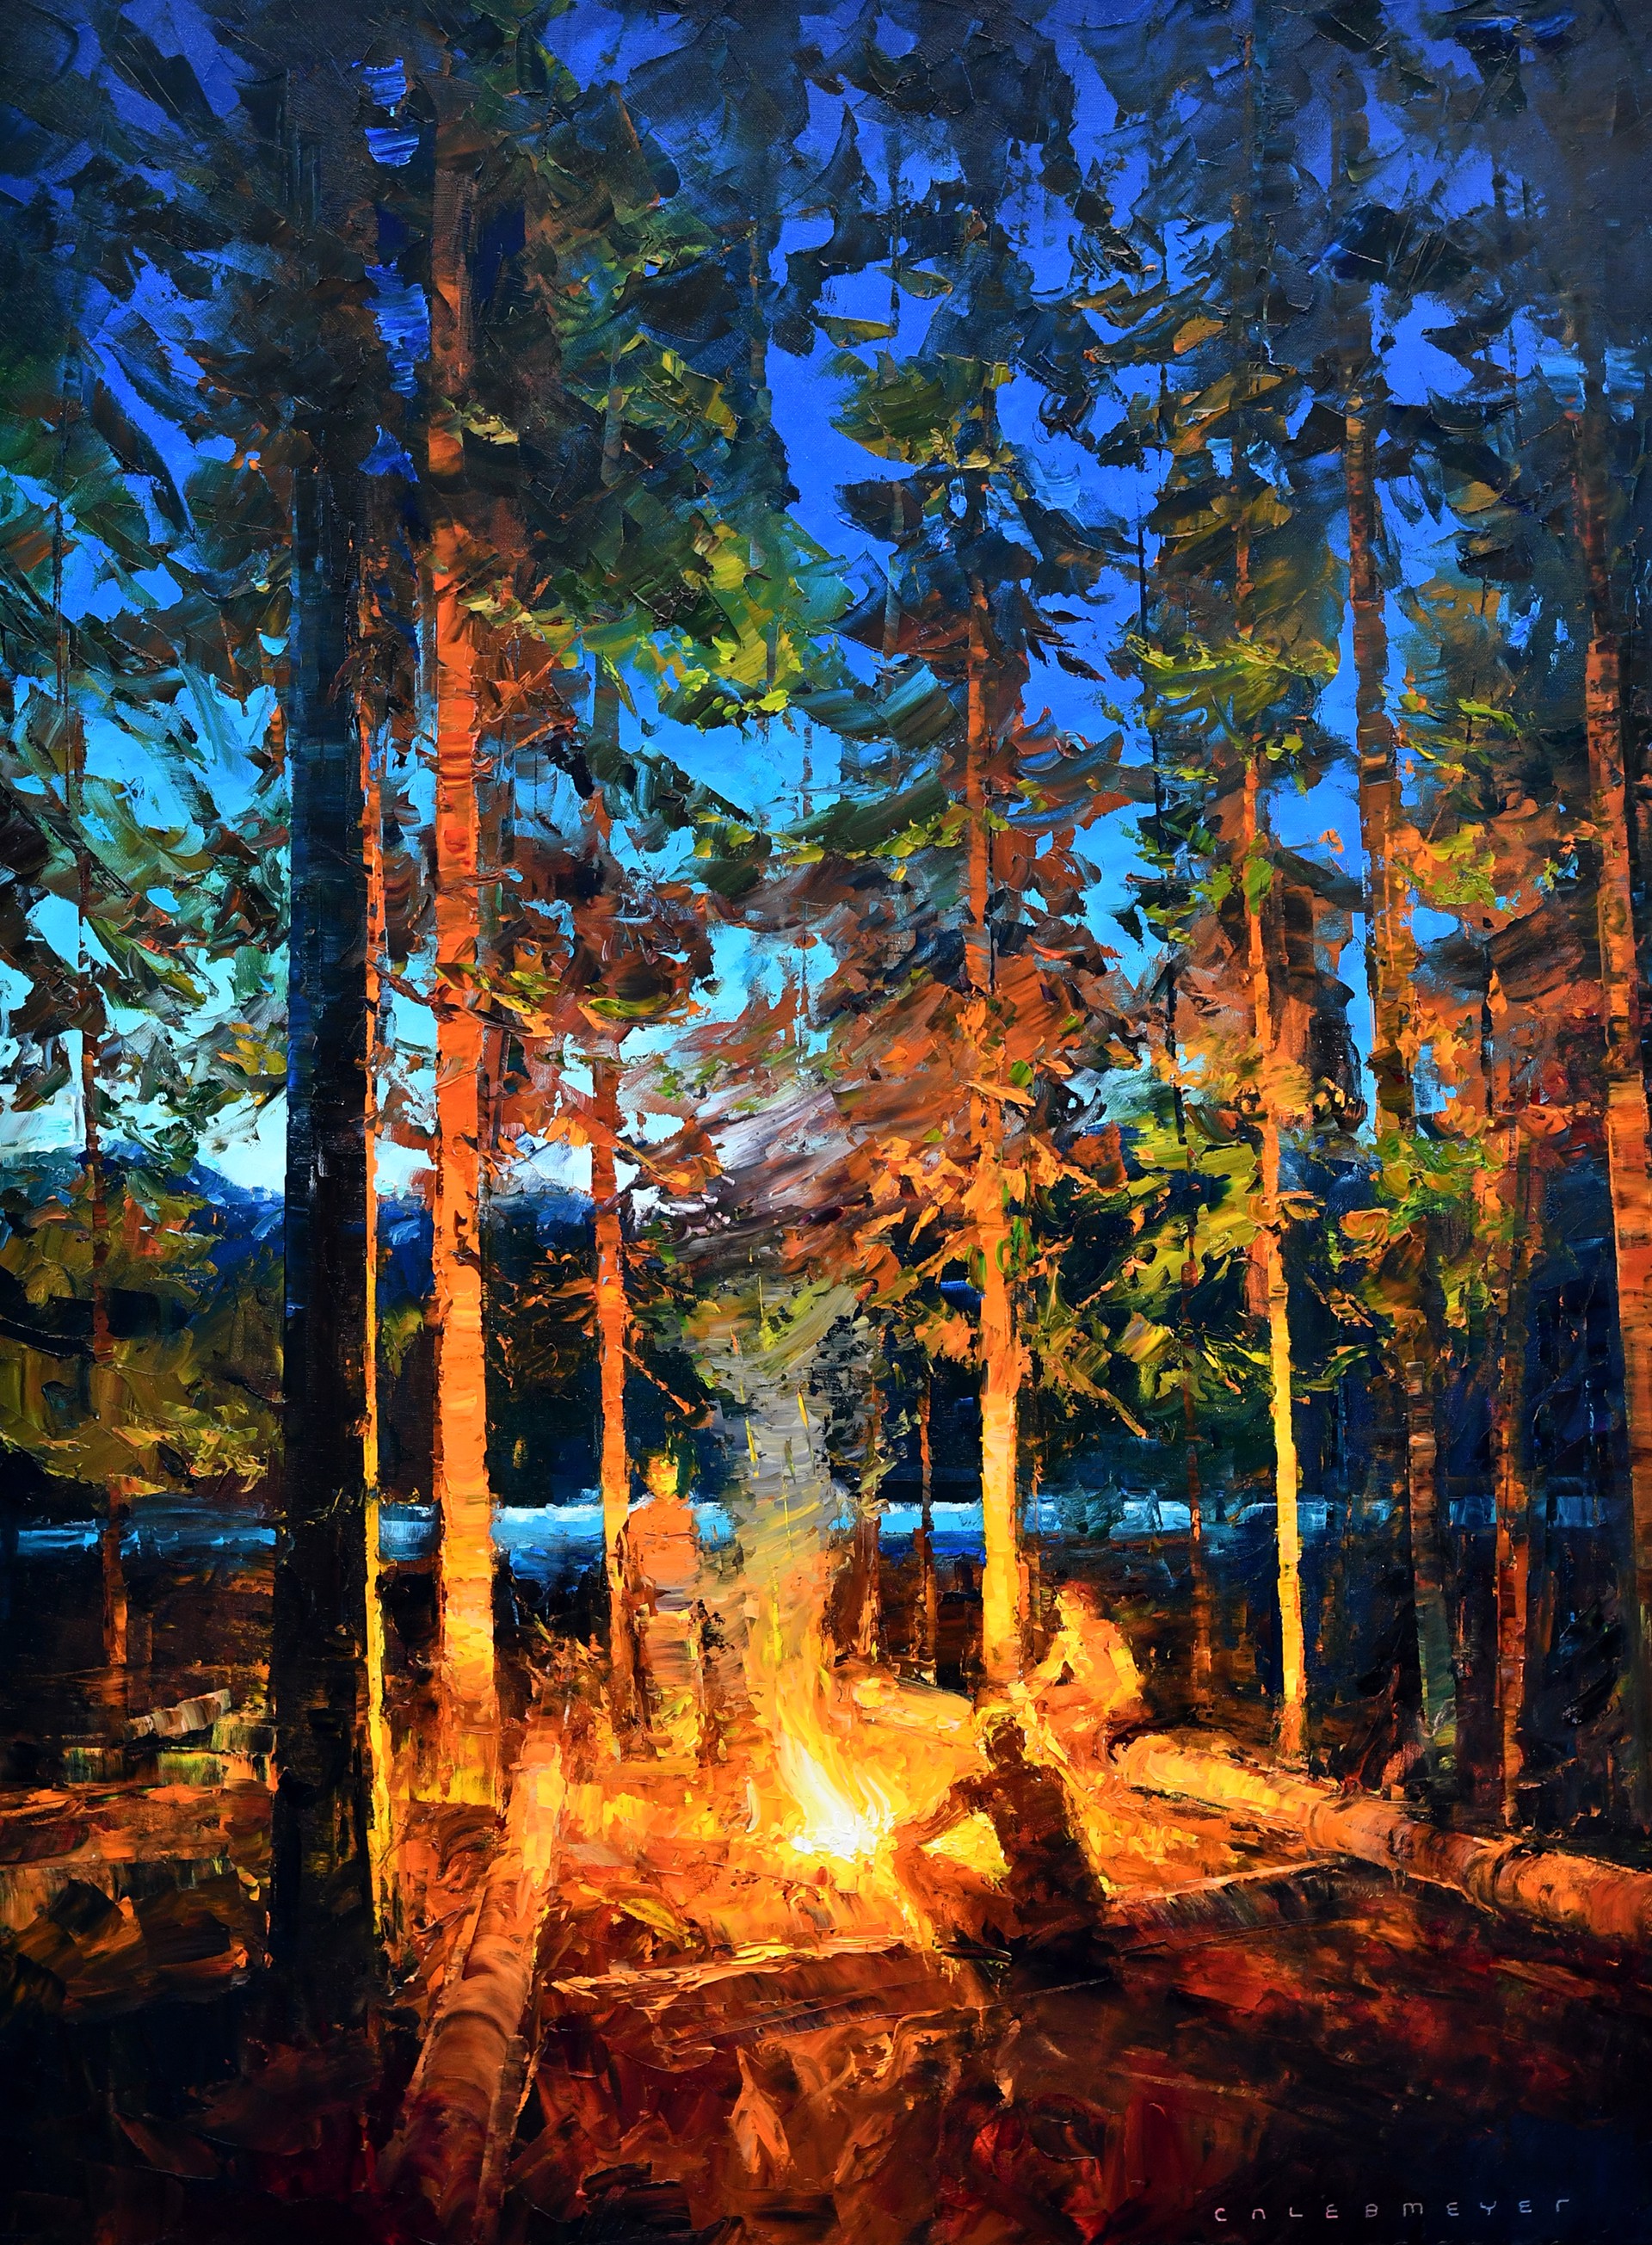 Original Oil Painting Featuring A Campfire At Dusk 